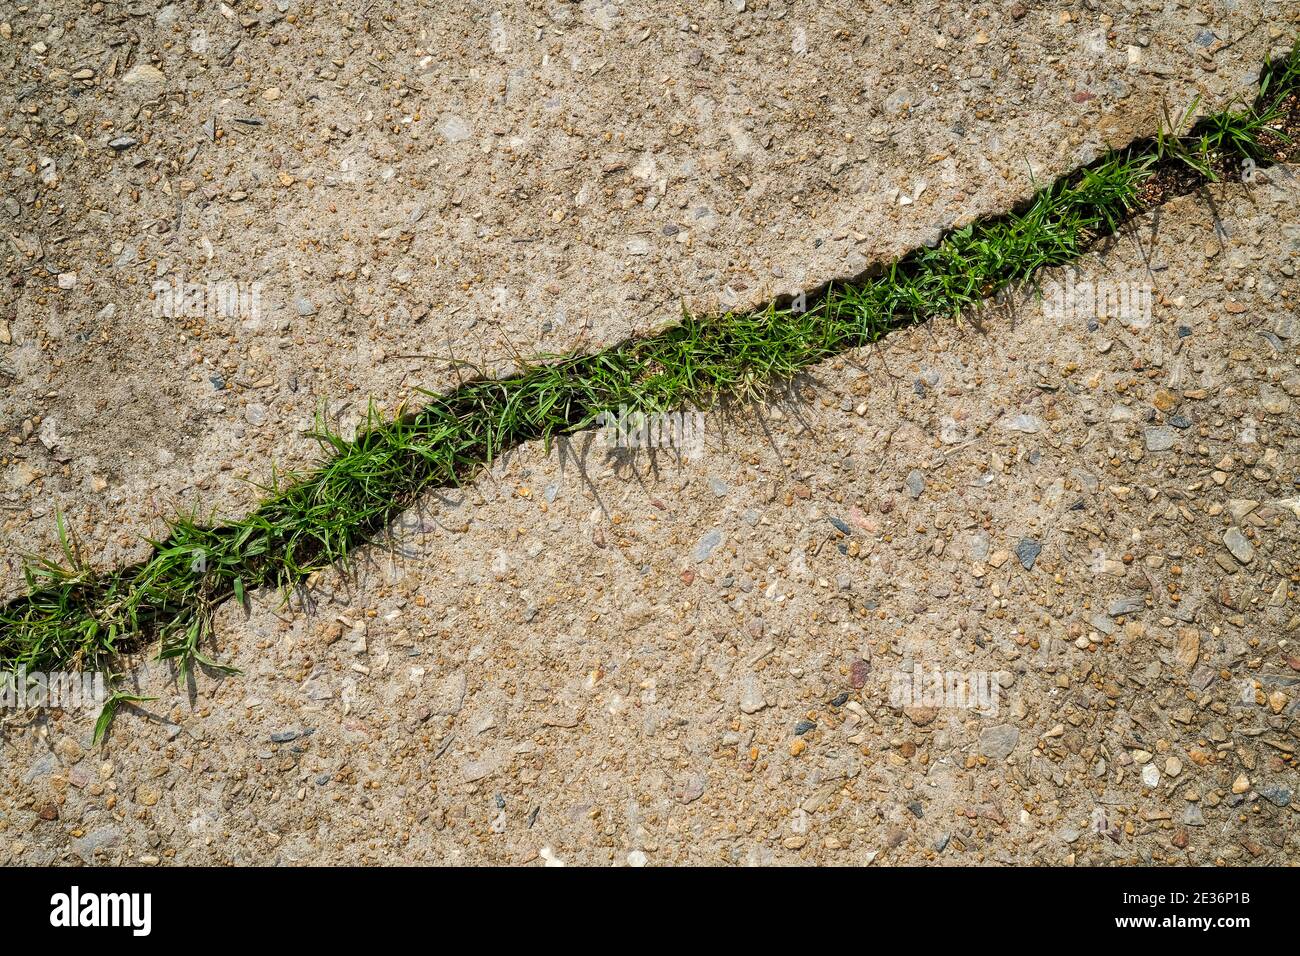 Crack in concrete floor, with grass growing in it Stock Photo